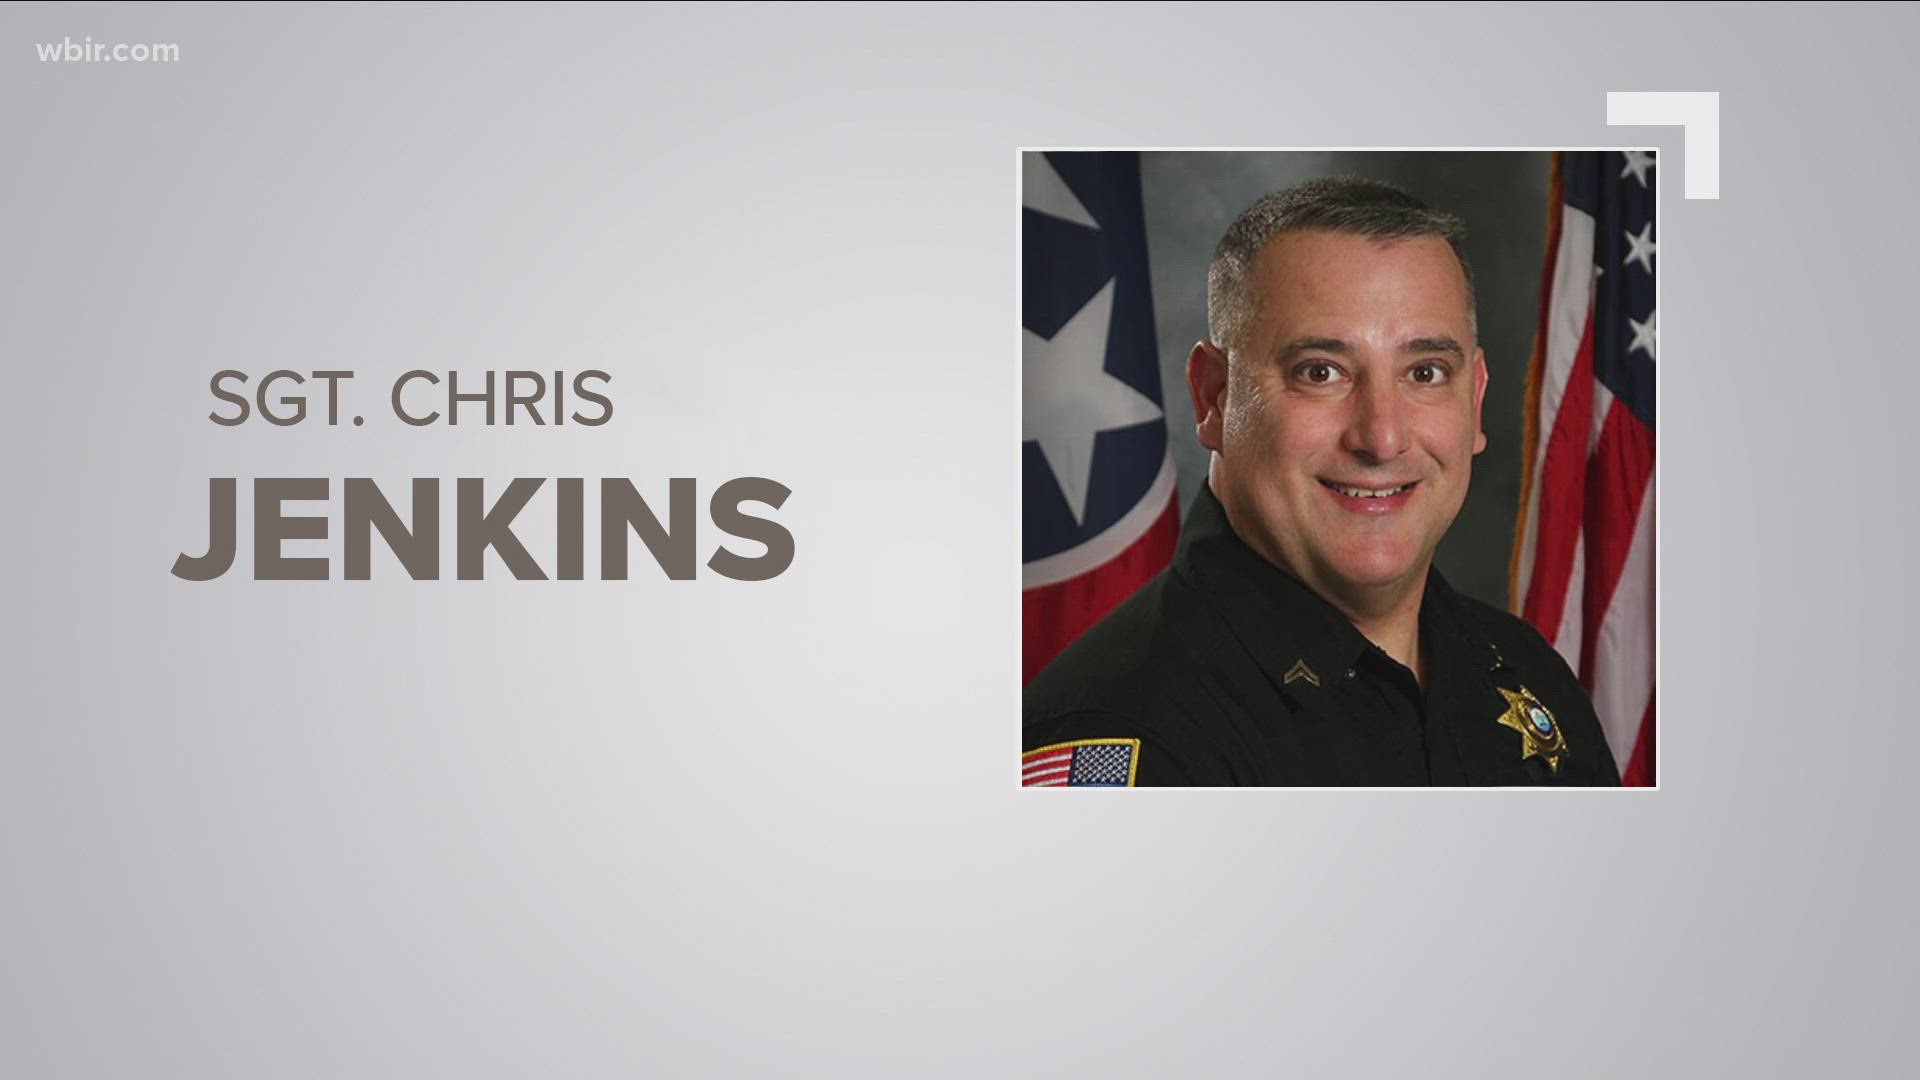 Sergeant Chris Jenkins served the department for two decades. He leaves behind a wife and two kids - including his son who is also a deputy.